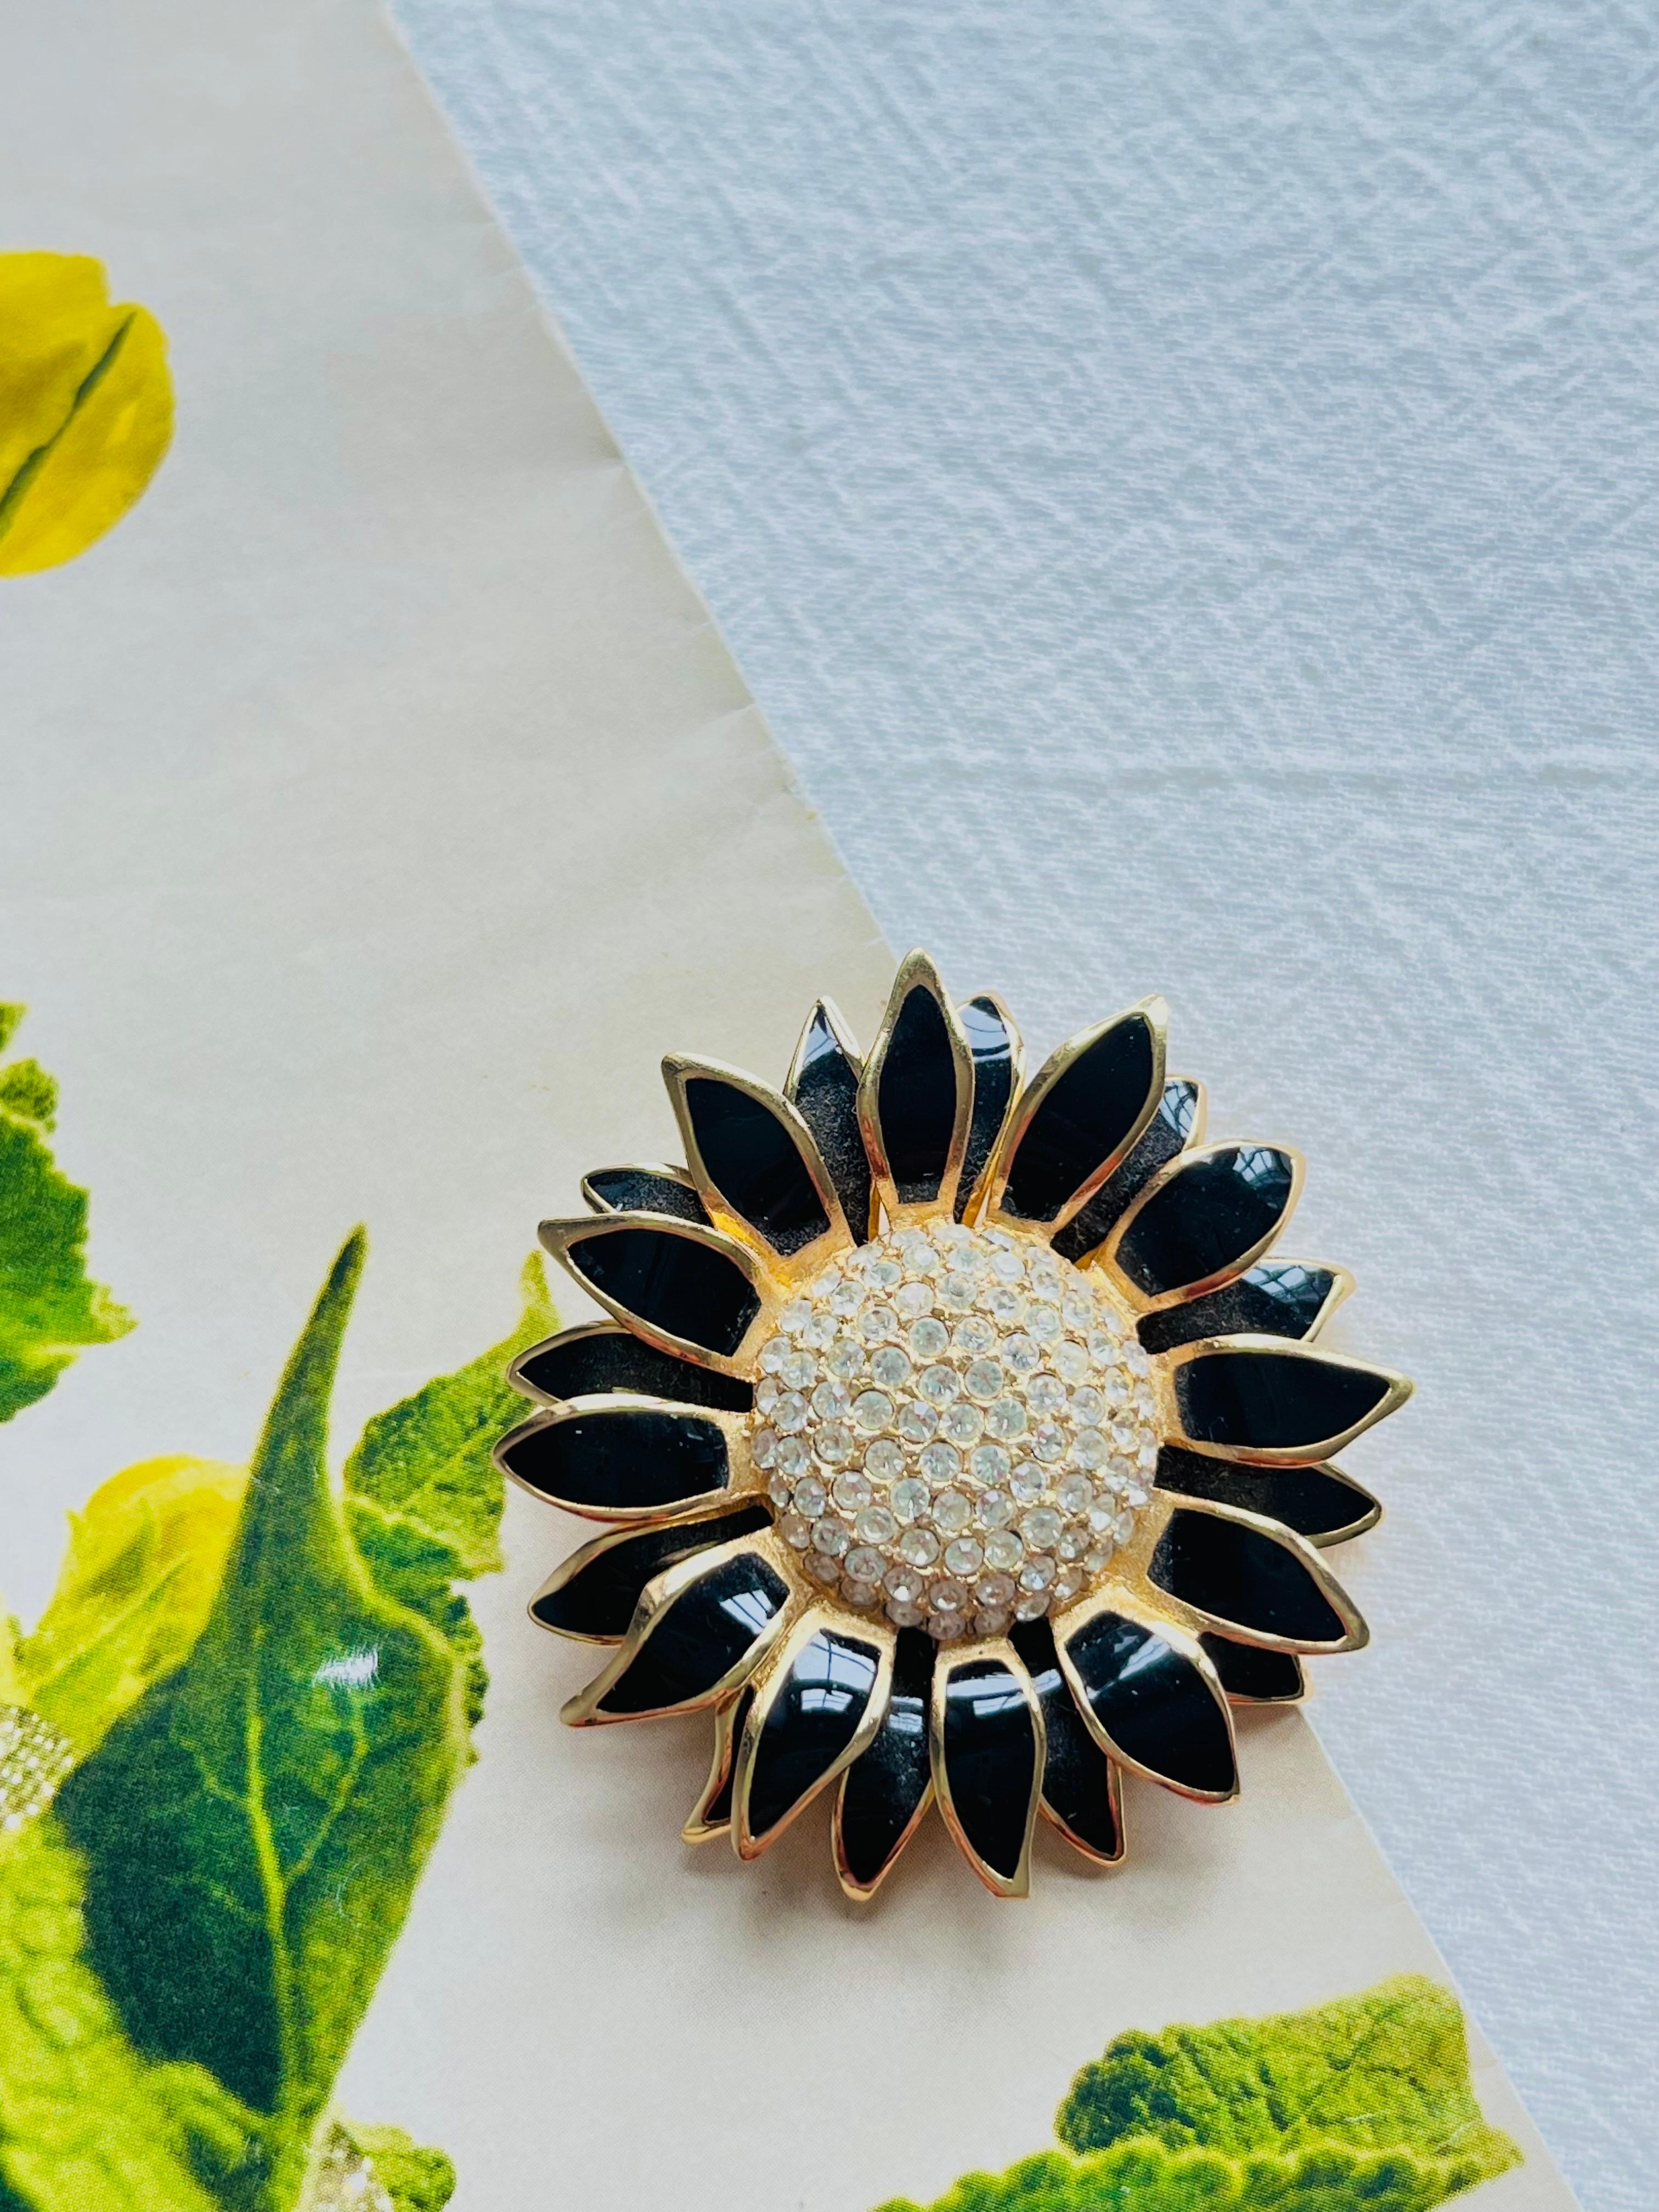 Christian Dior Vintage 1980s Crystals Black Petal Sunflower Double Layer Brooch In Excellent Condition For Sale In Wokingham, England